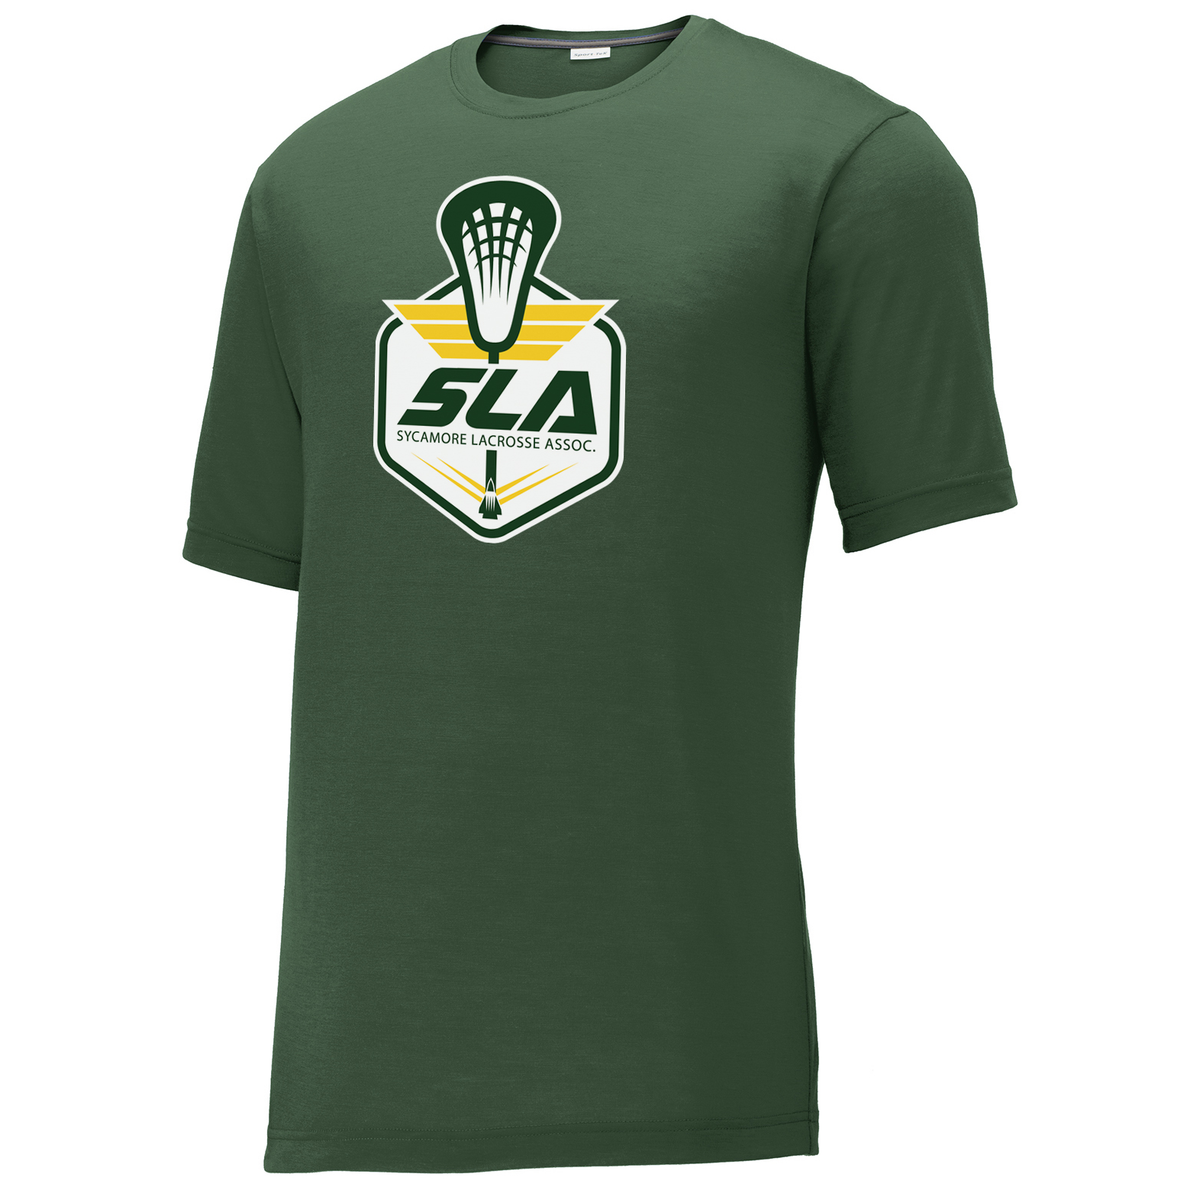 Sycamore Lacrosse Association Green CottonTouch Performance T-Shirt